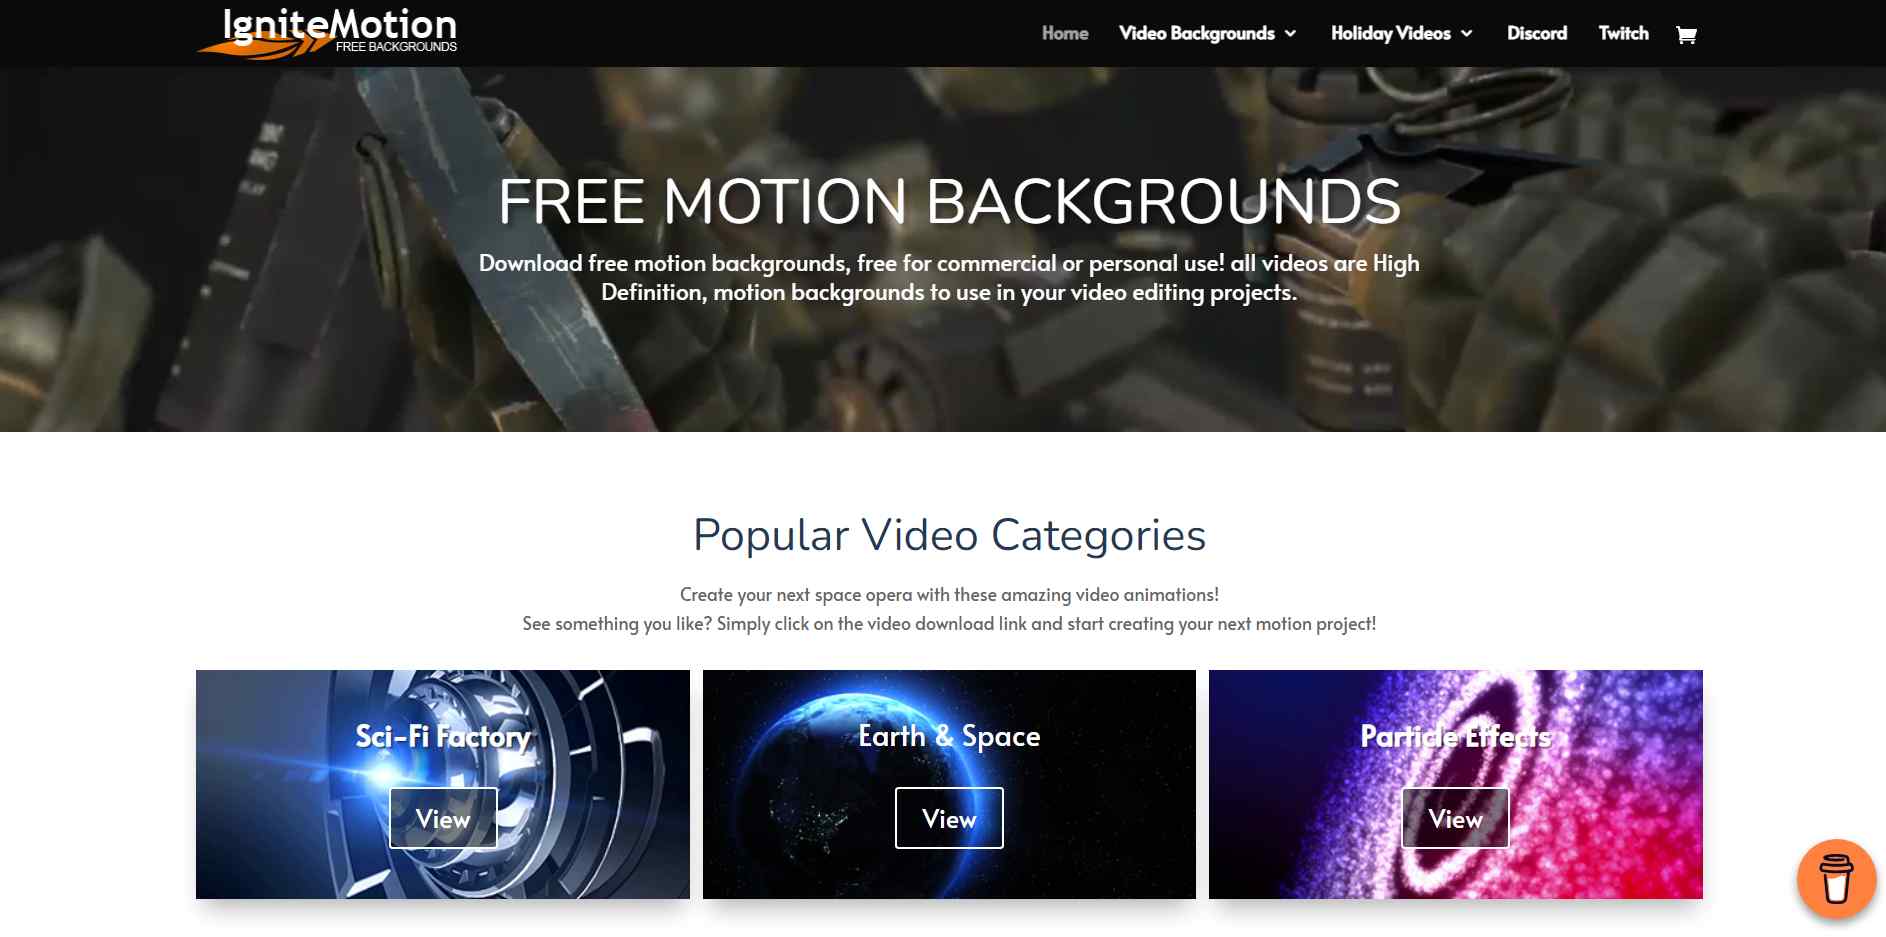 Ignite Motion Free Stock Animation Website to Make Online Videos